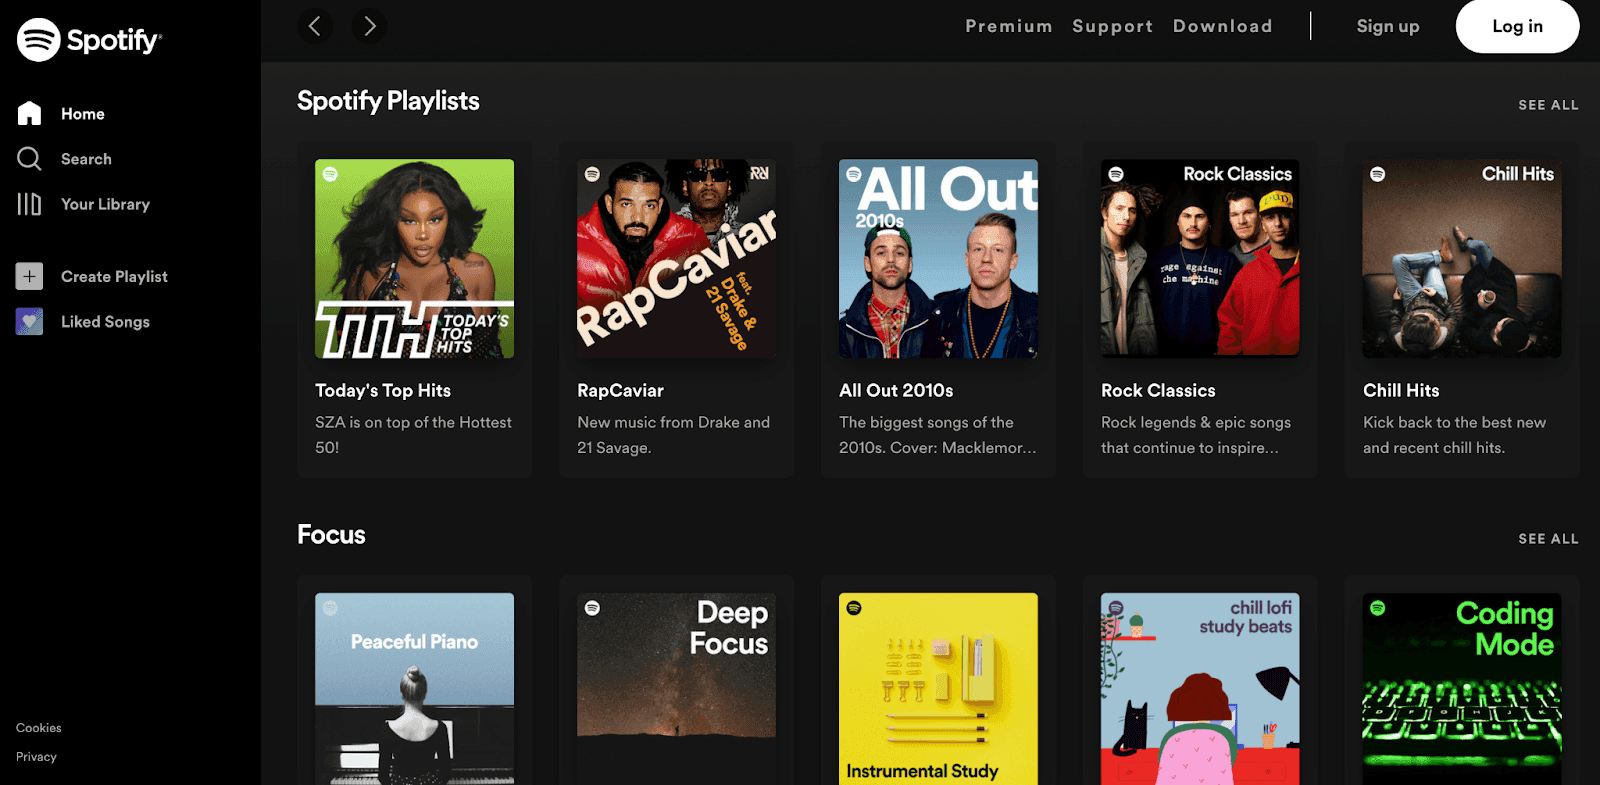 Spotify home menu showing different items found on Spotify